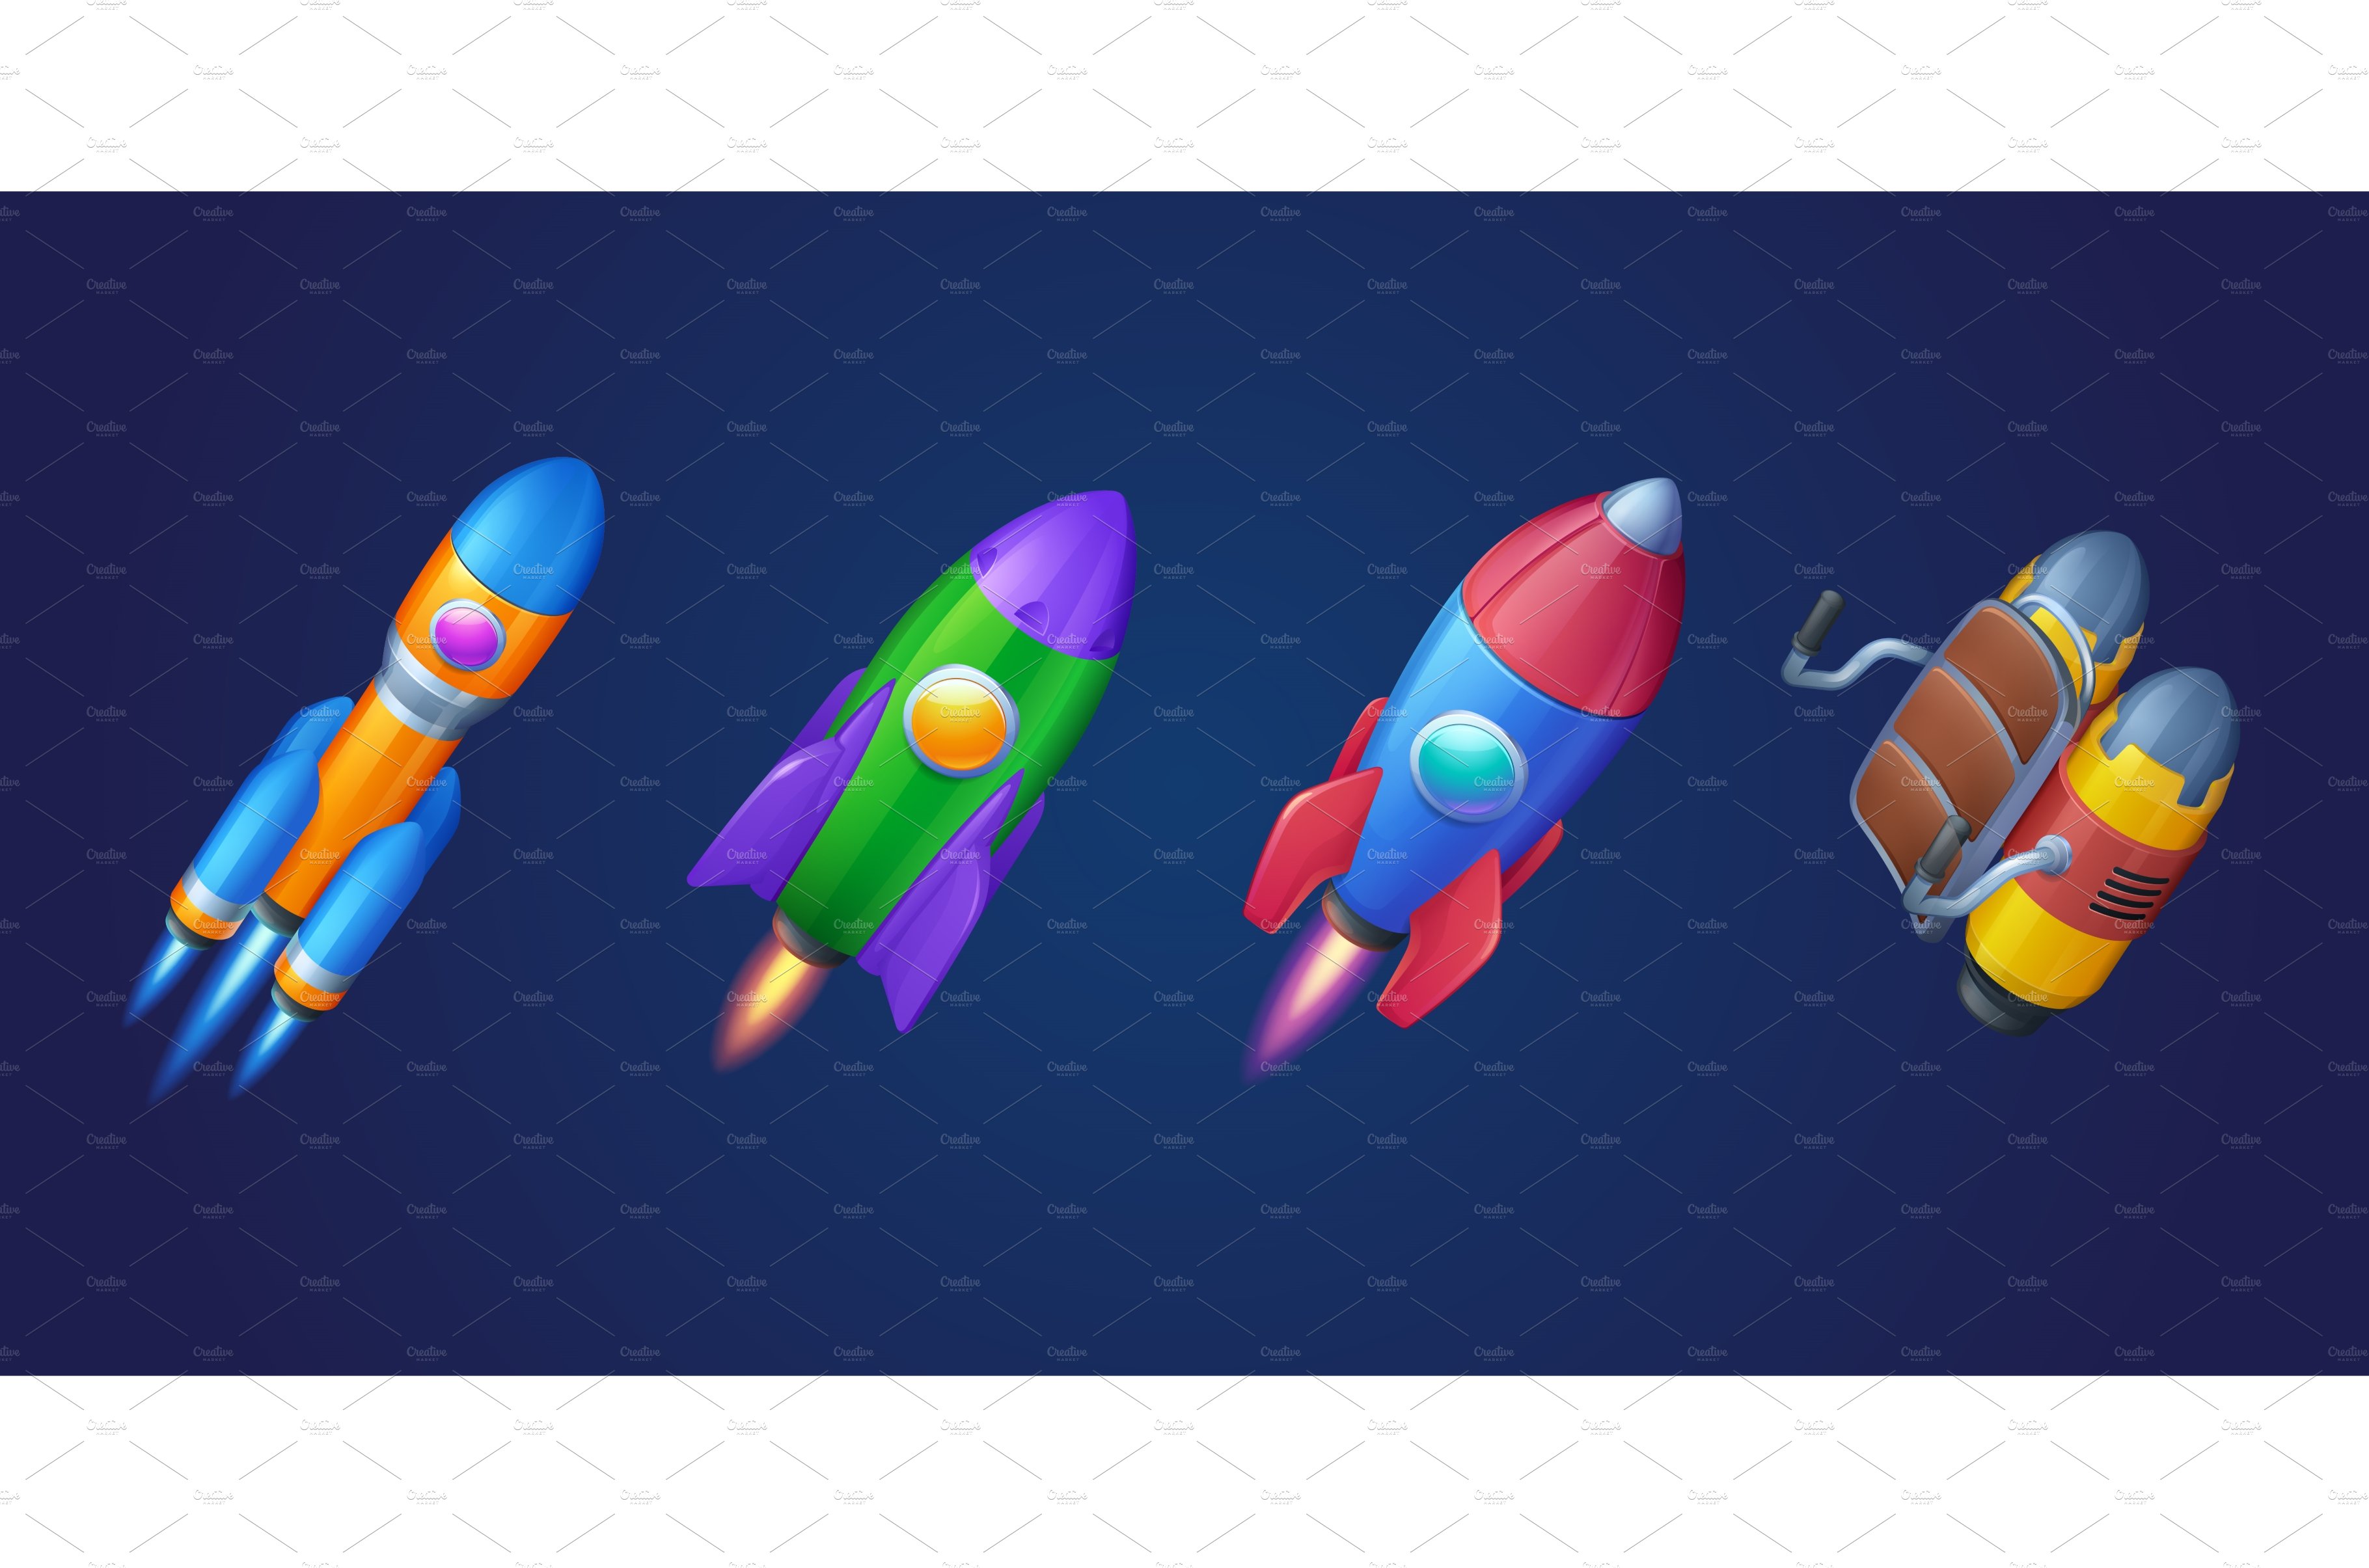 Cartoon rockets, shuttles and cover image.